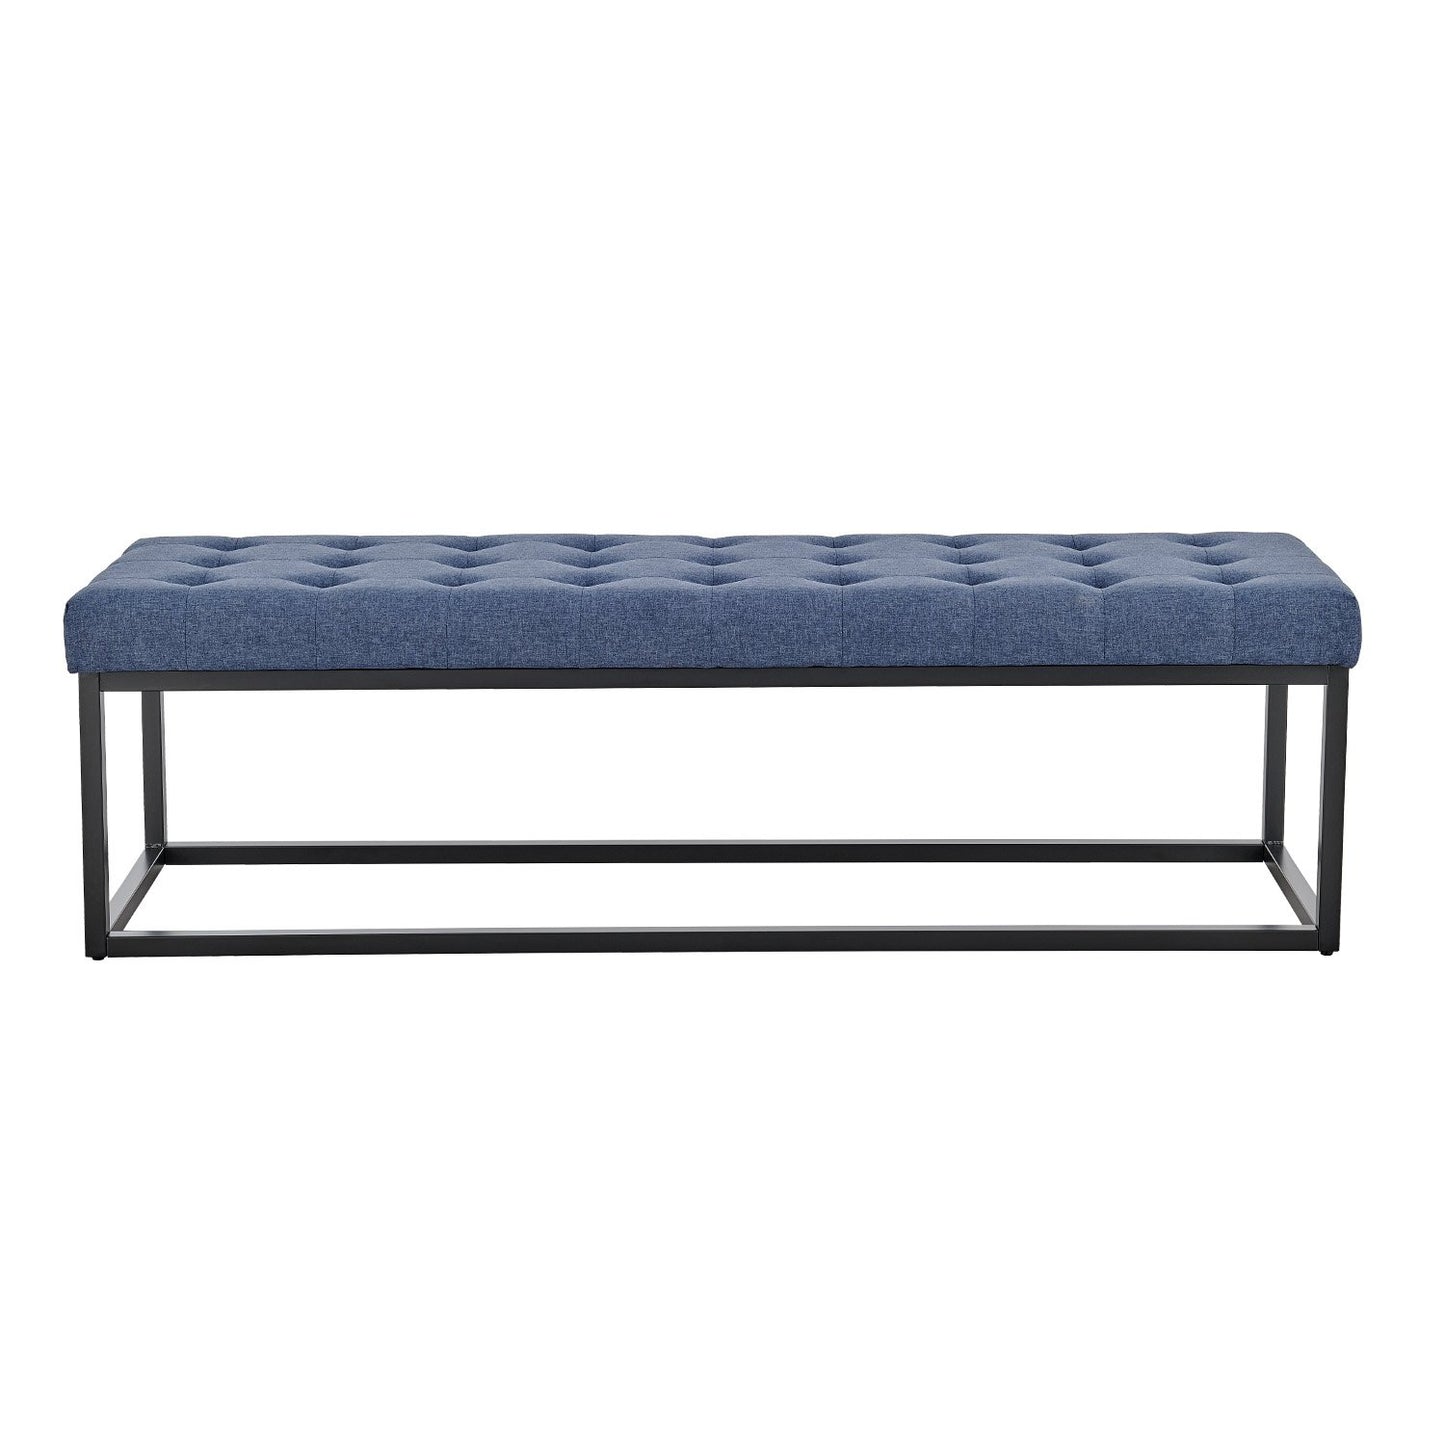 Cameron Button-Tufted Upholstered Bench with Metal Legs - Blue